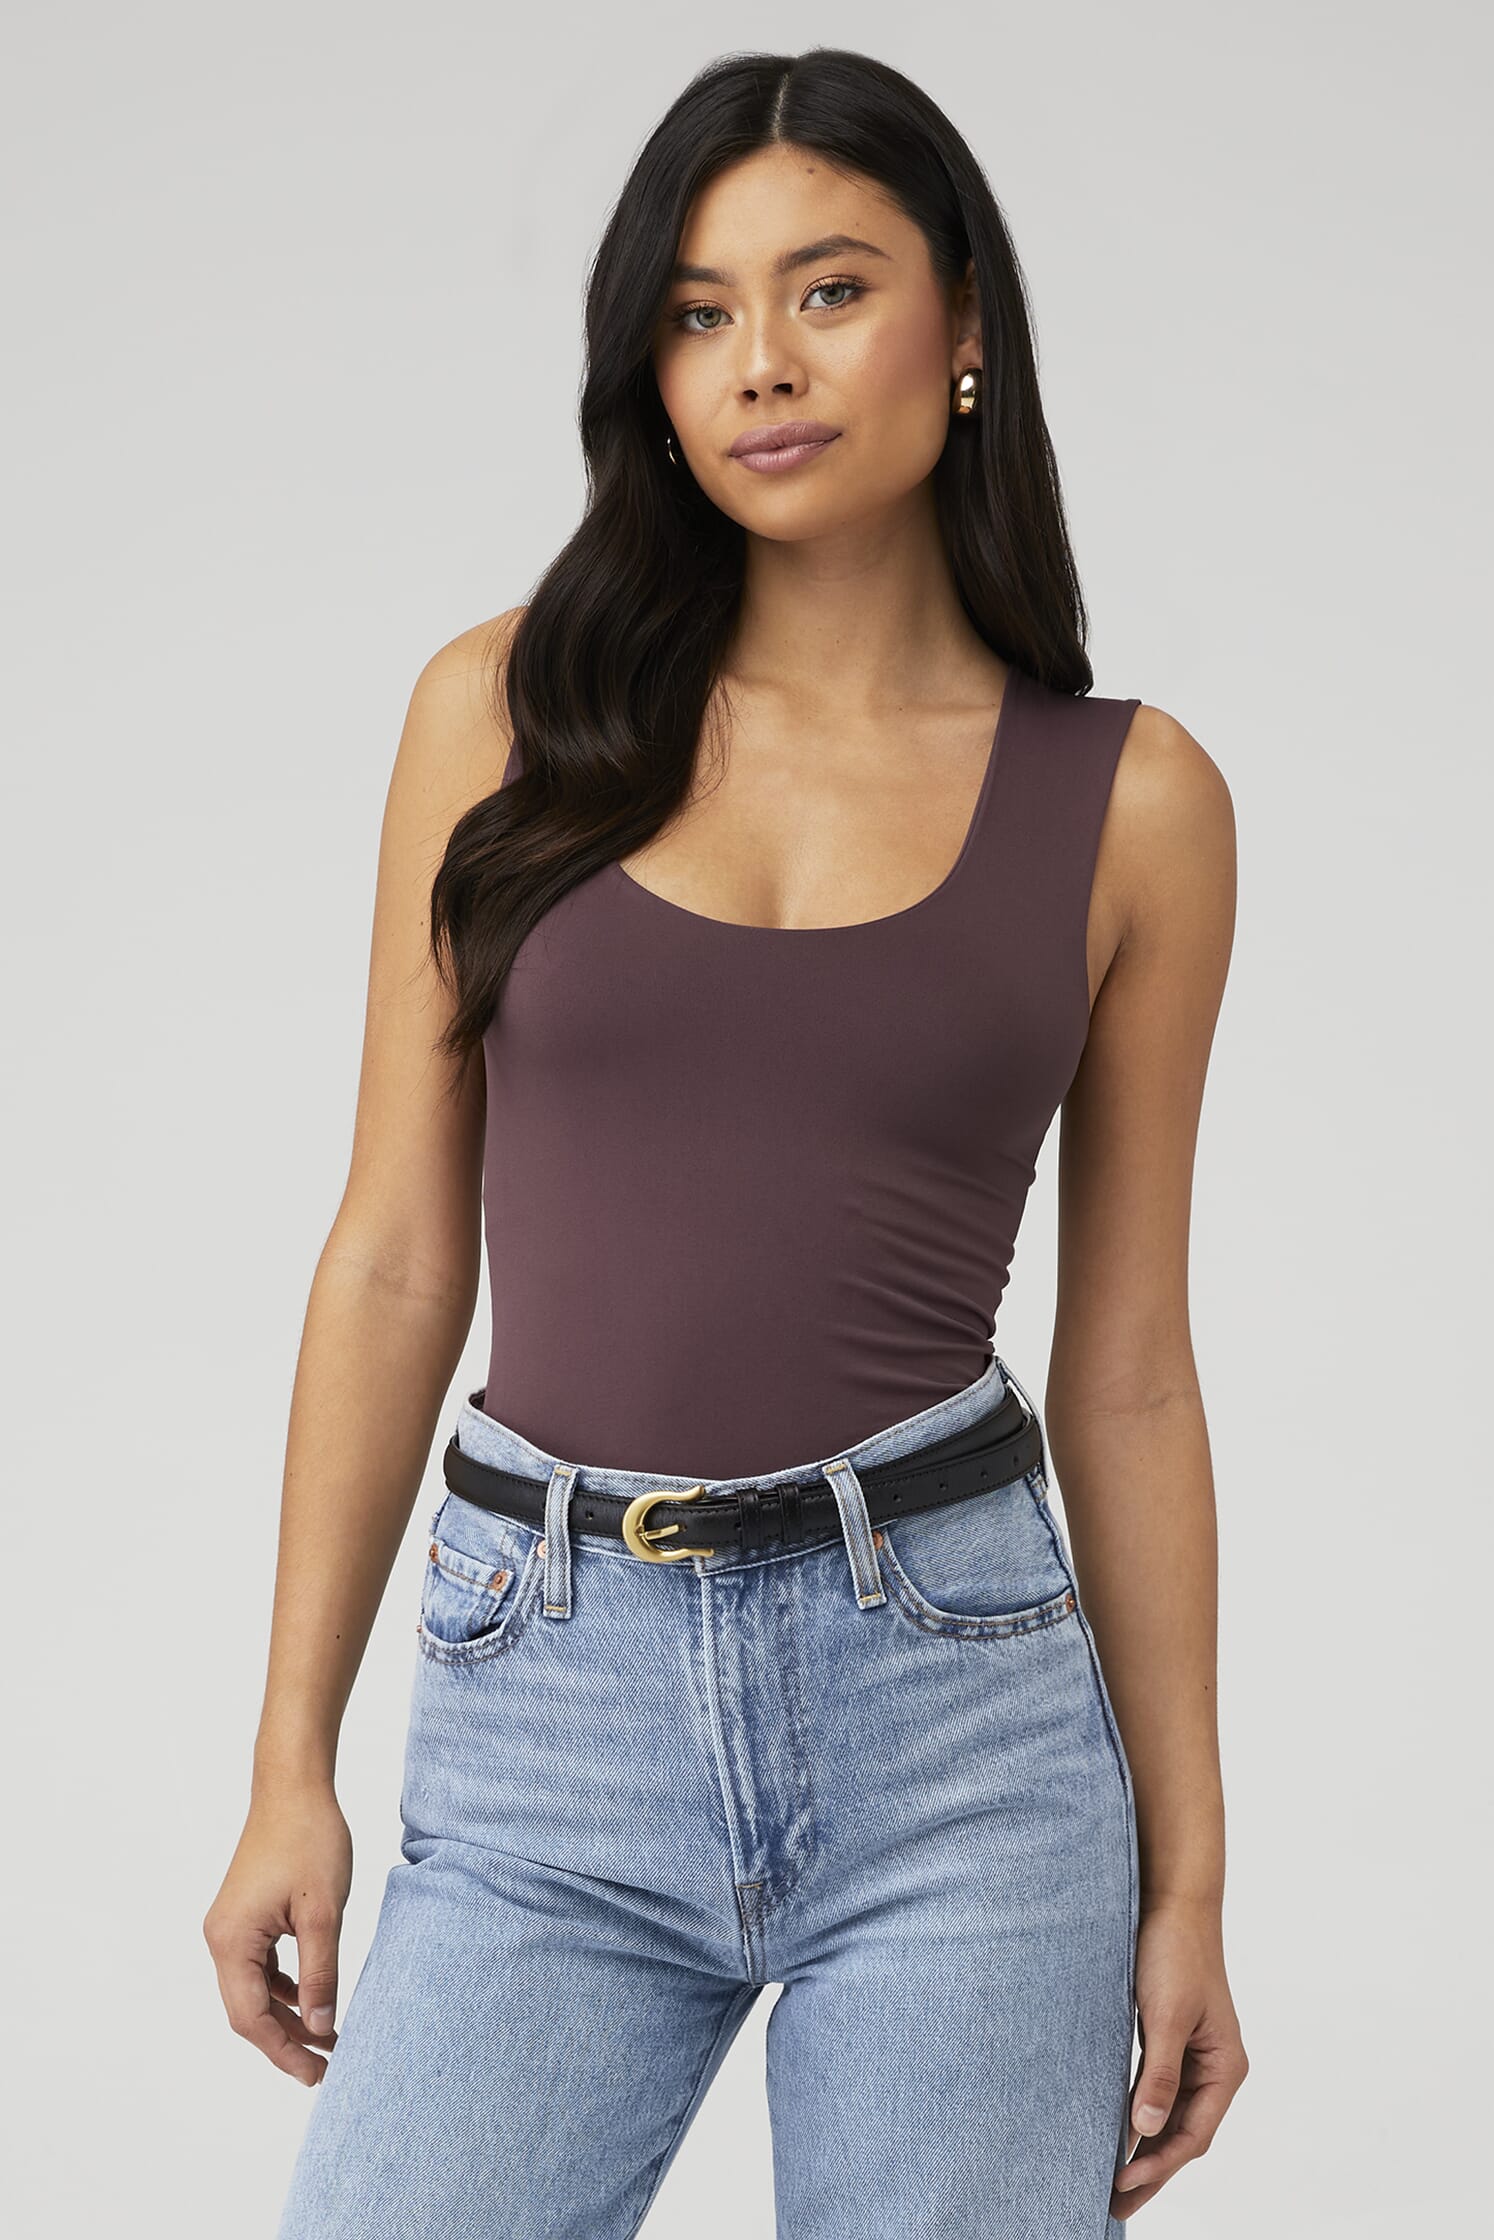 Free People, Clean Lines Muscle Cami in Chocolate Merlot